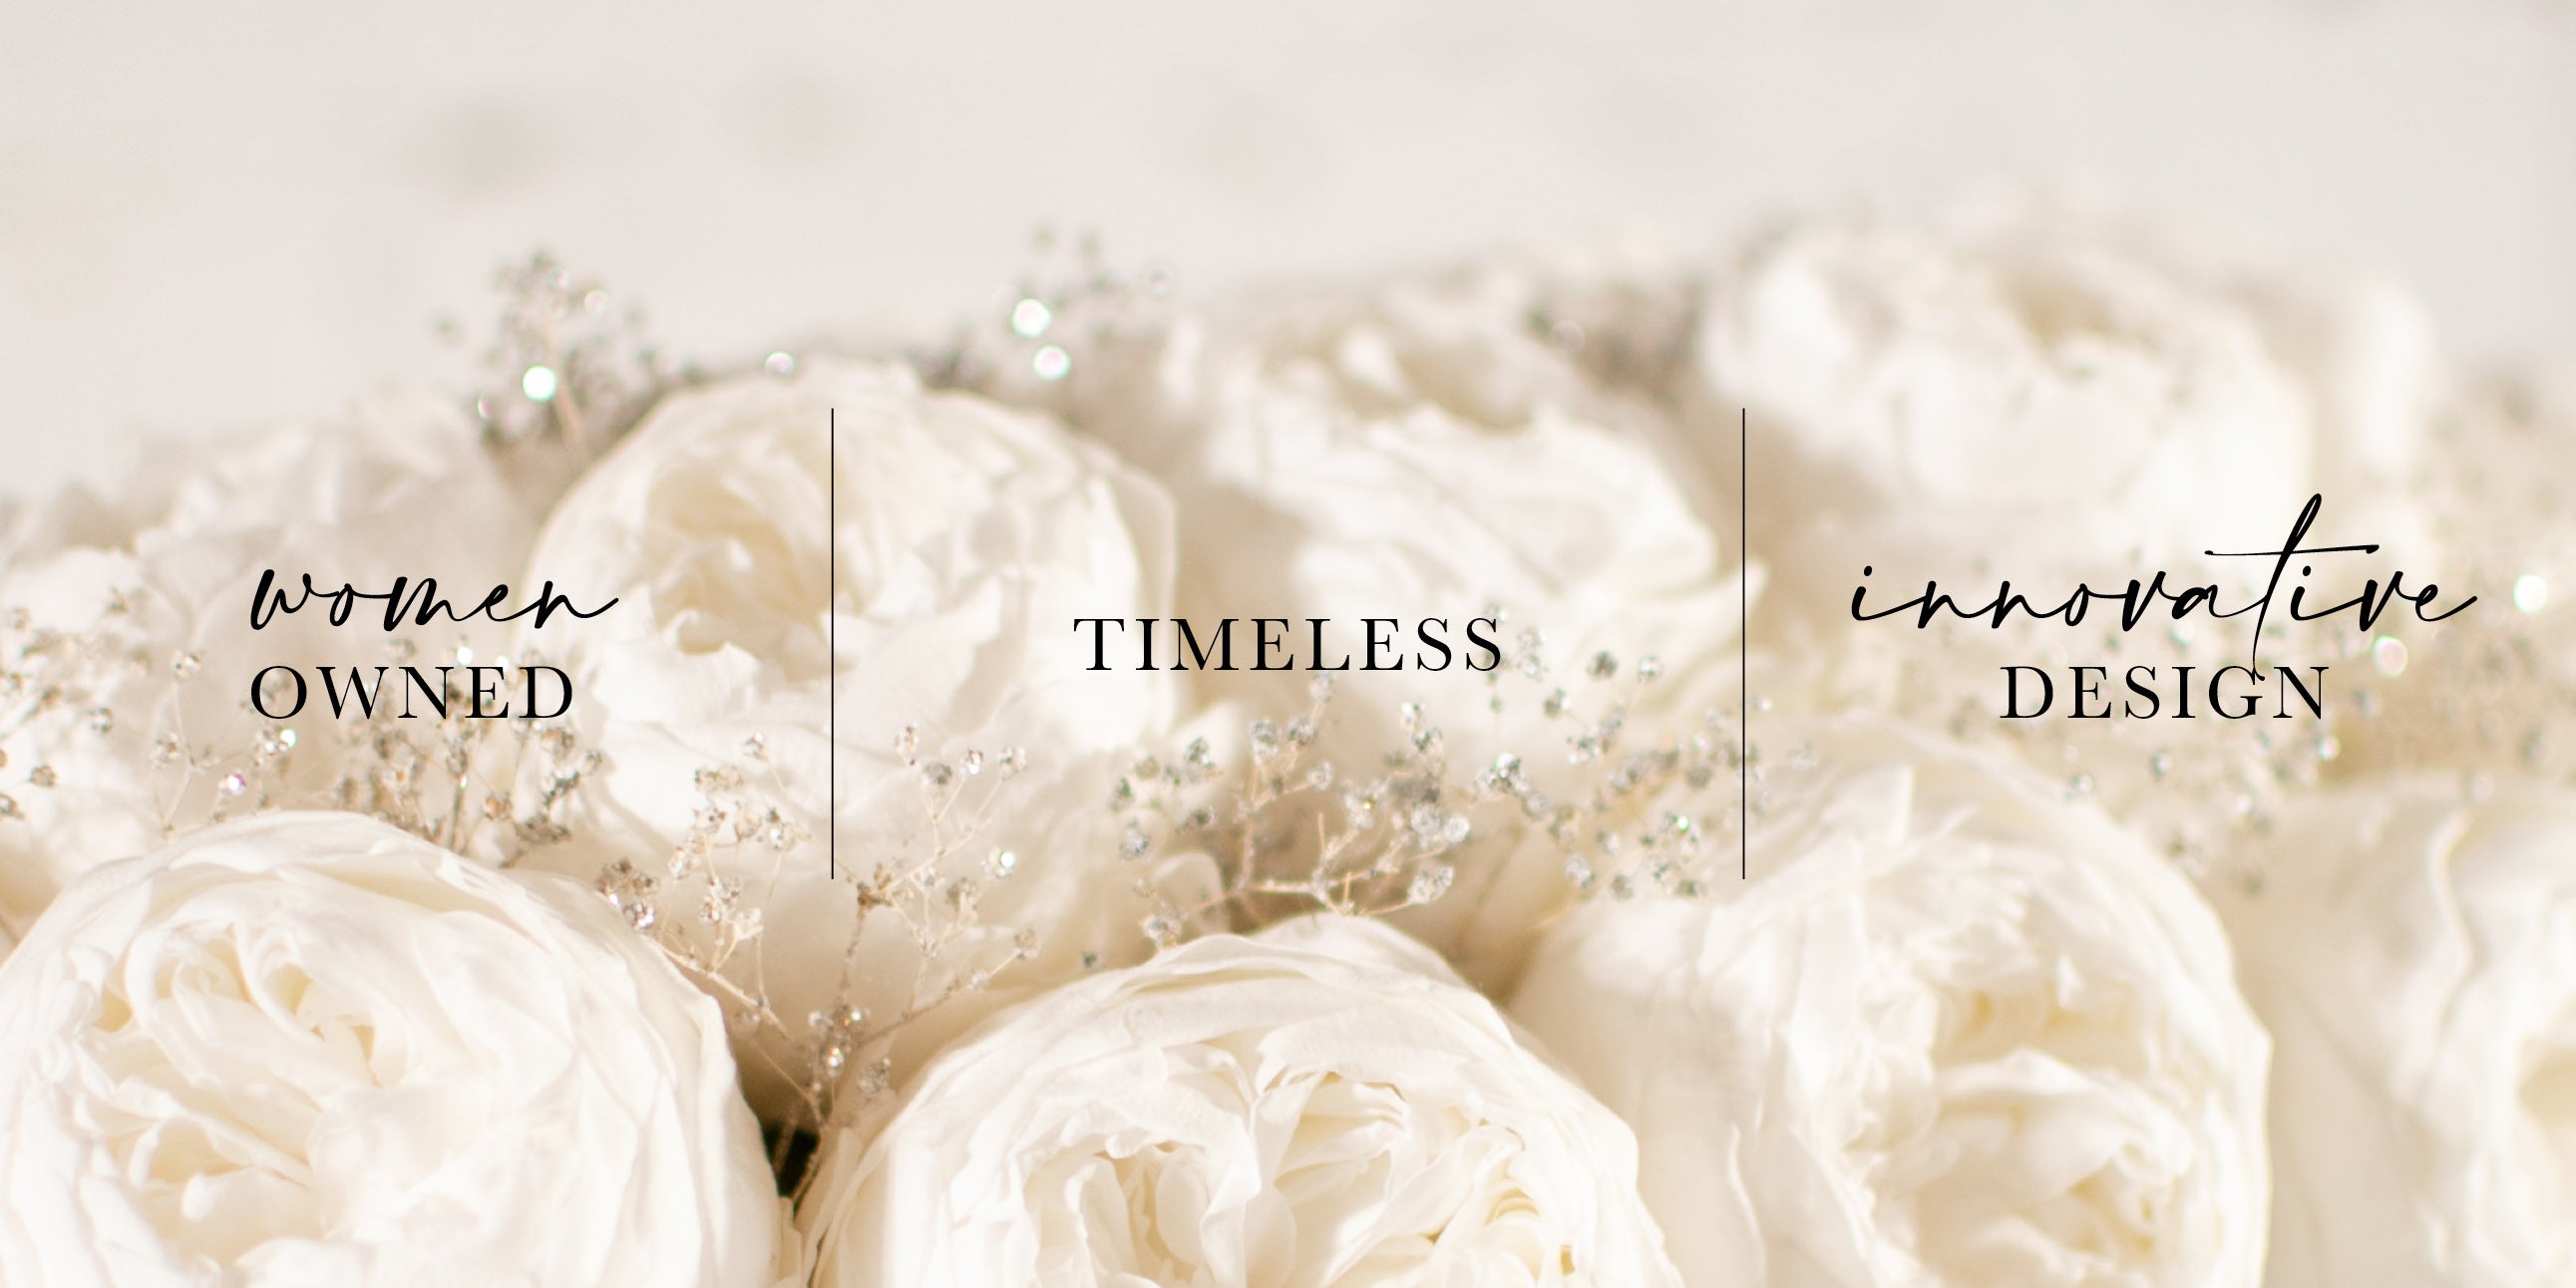 White Preserved Flowers with Women Owned, Timeless, and Innovative Design text